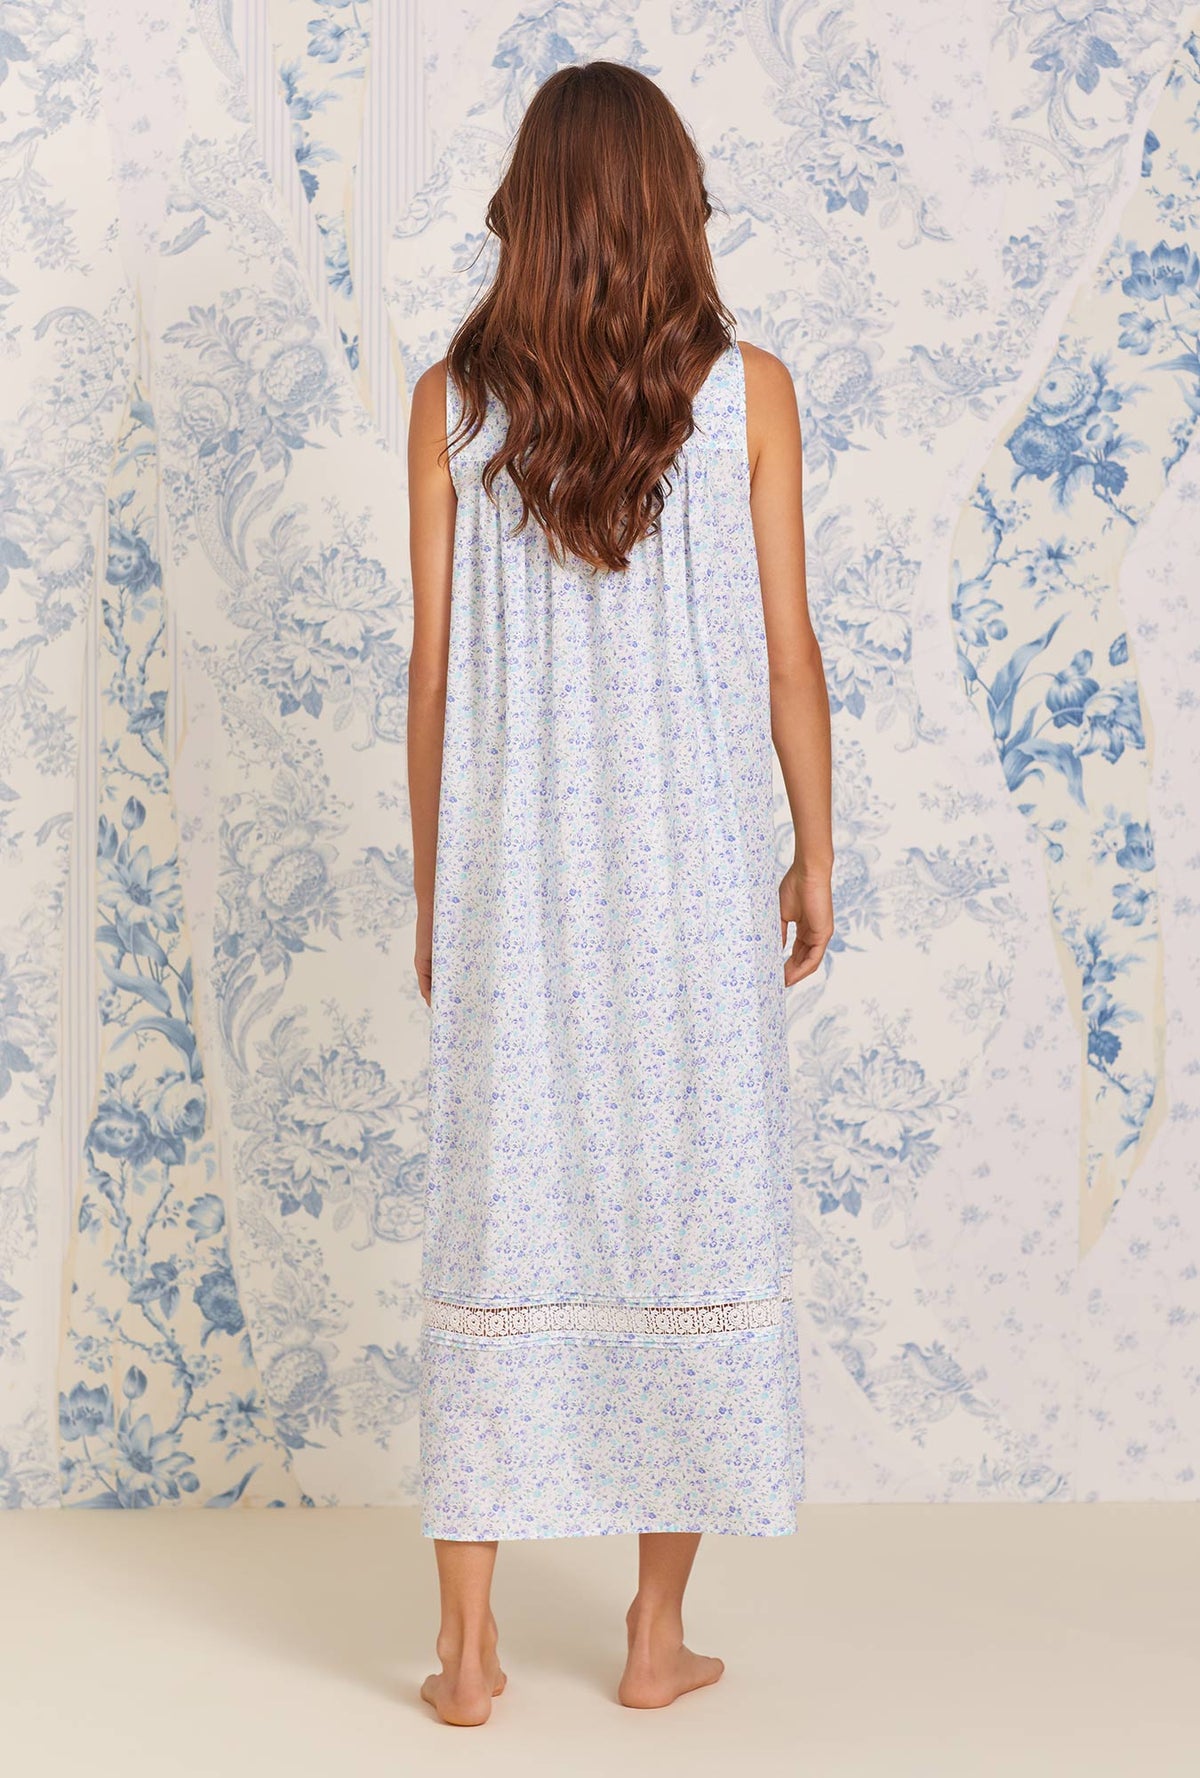 A lady wearing blue sleeveless Nightgown with Sweet Ditsy Dream print